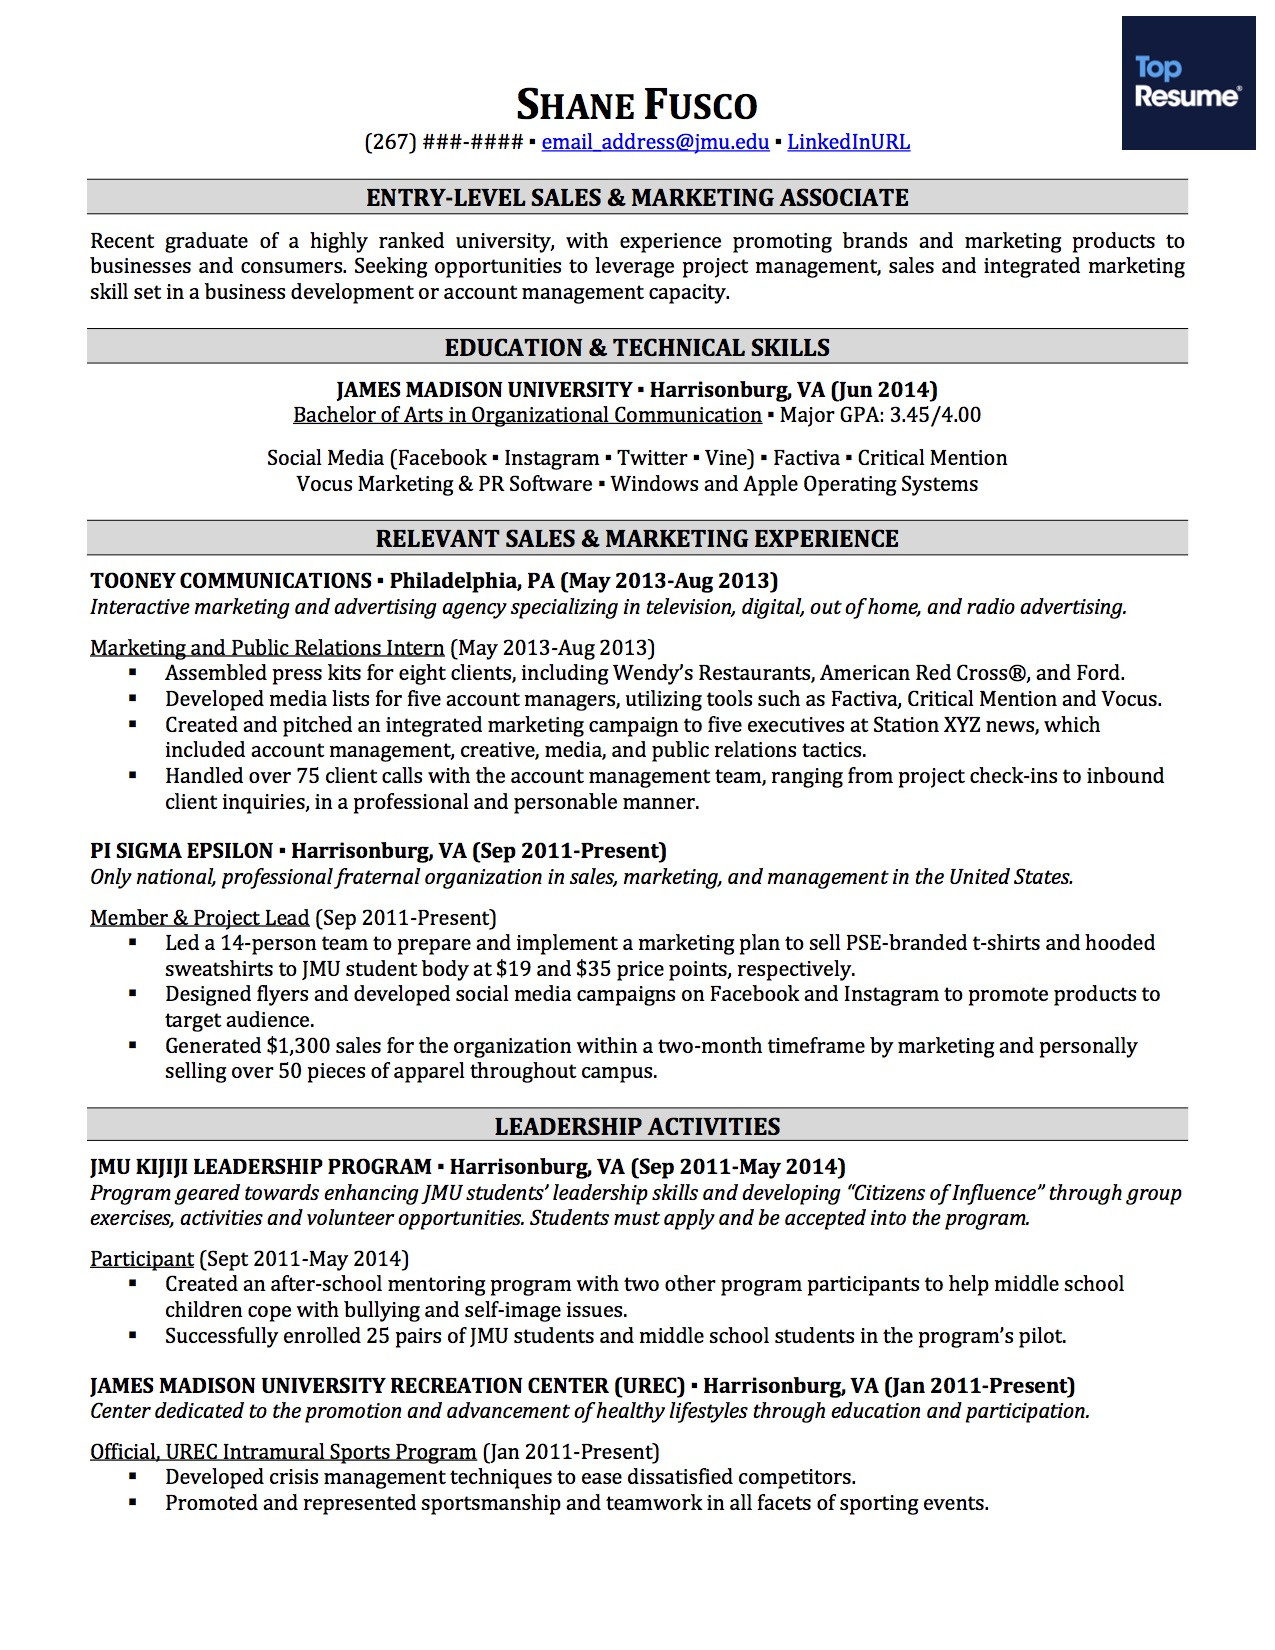 Sample Resume with No Experience From How to Make A Great Resume with No Experience topresume